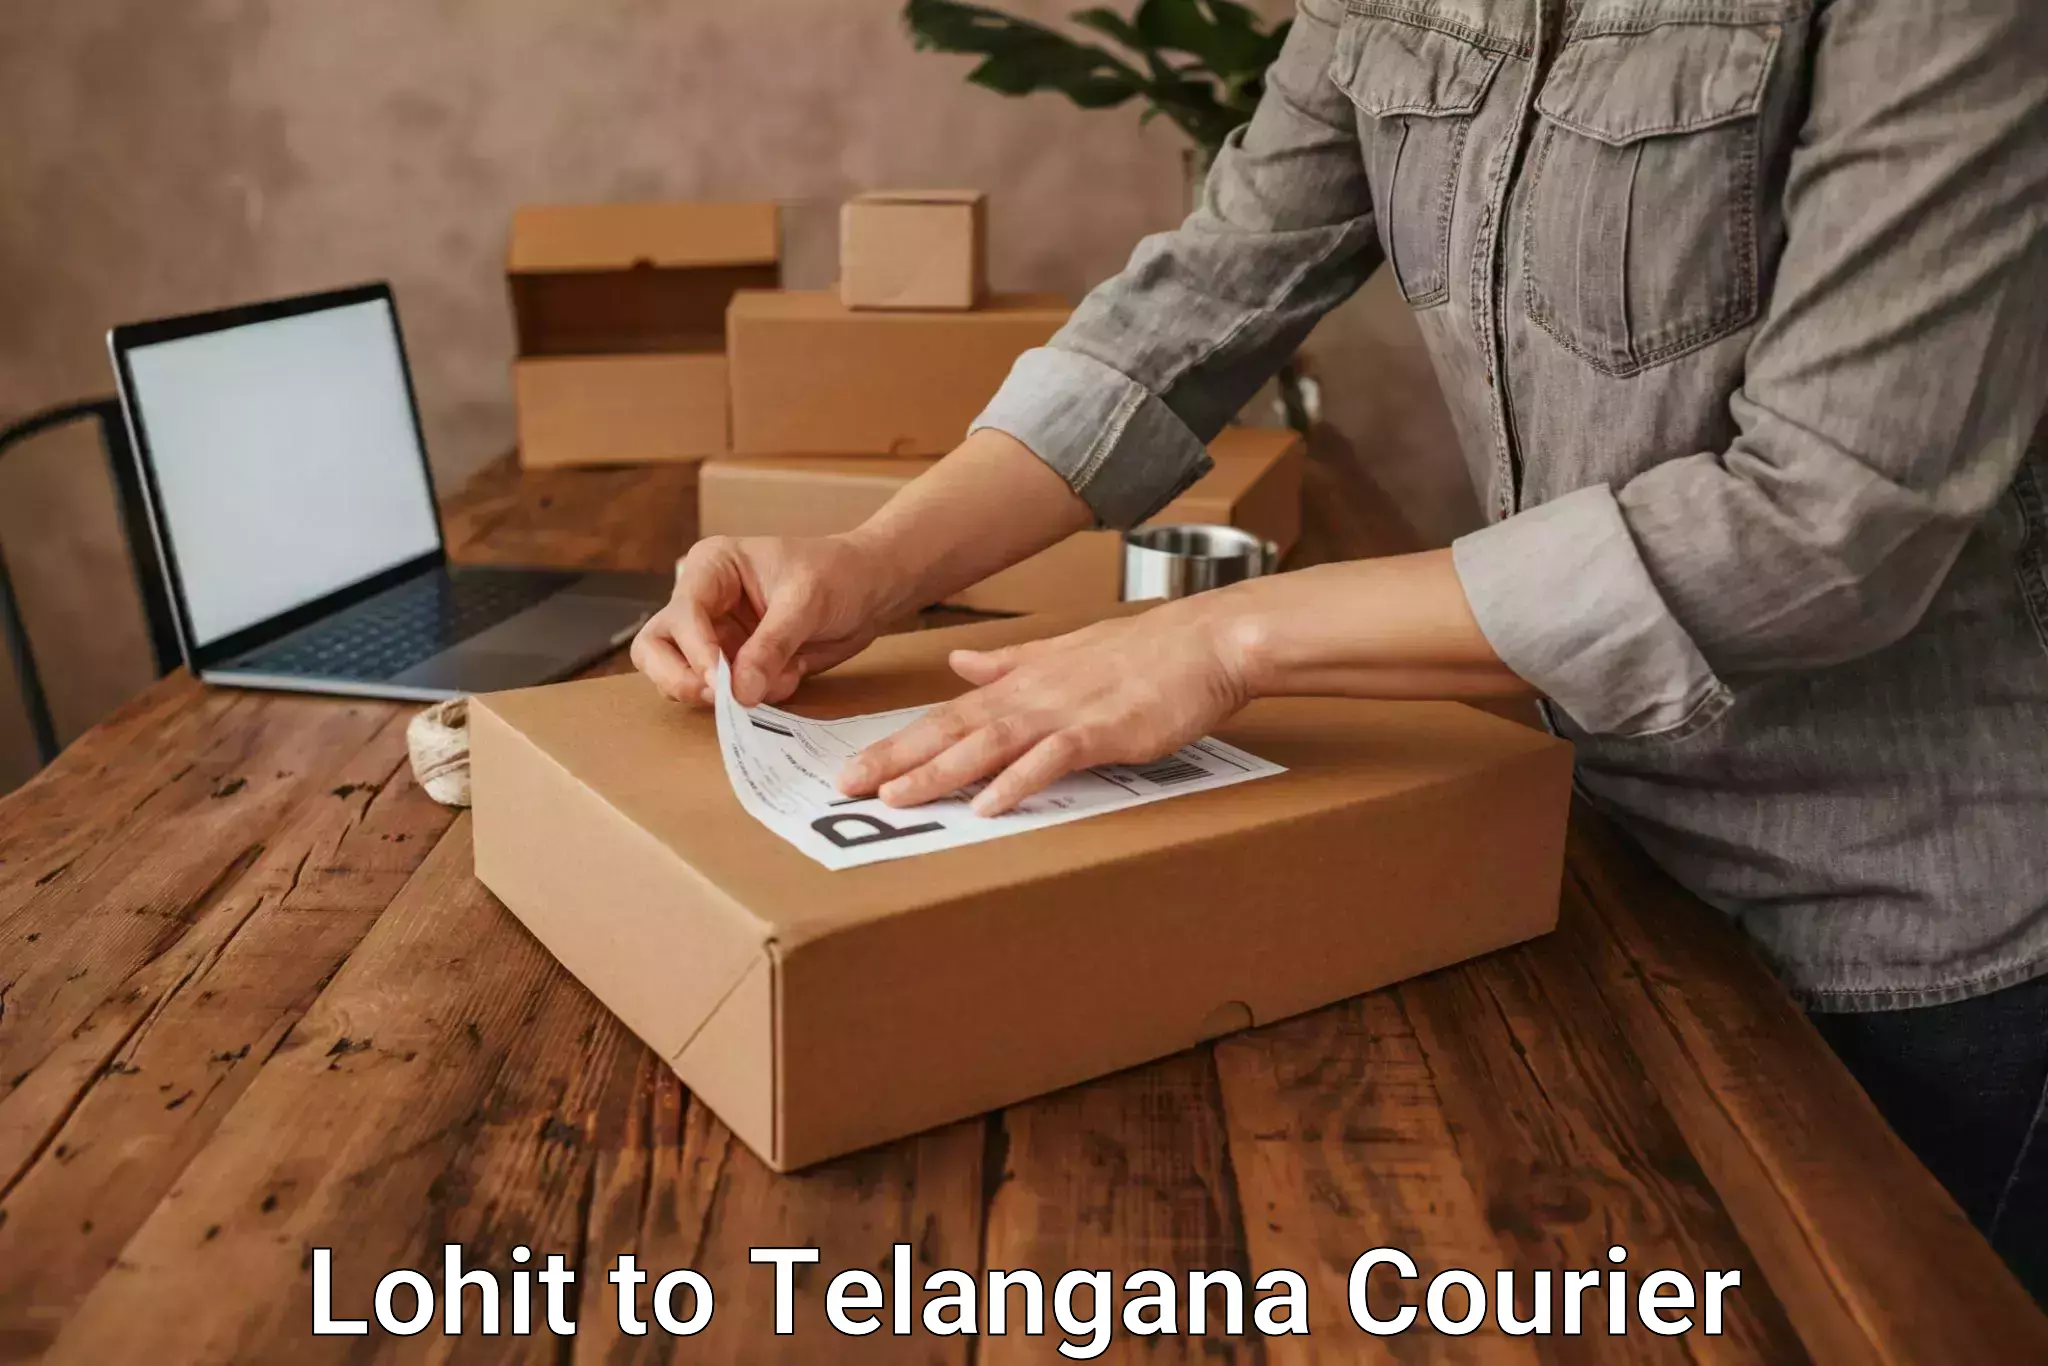 Bulk courier orders in Lohit to Jainad